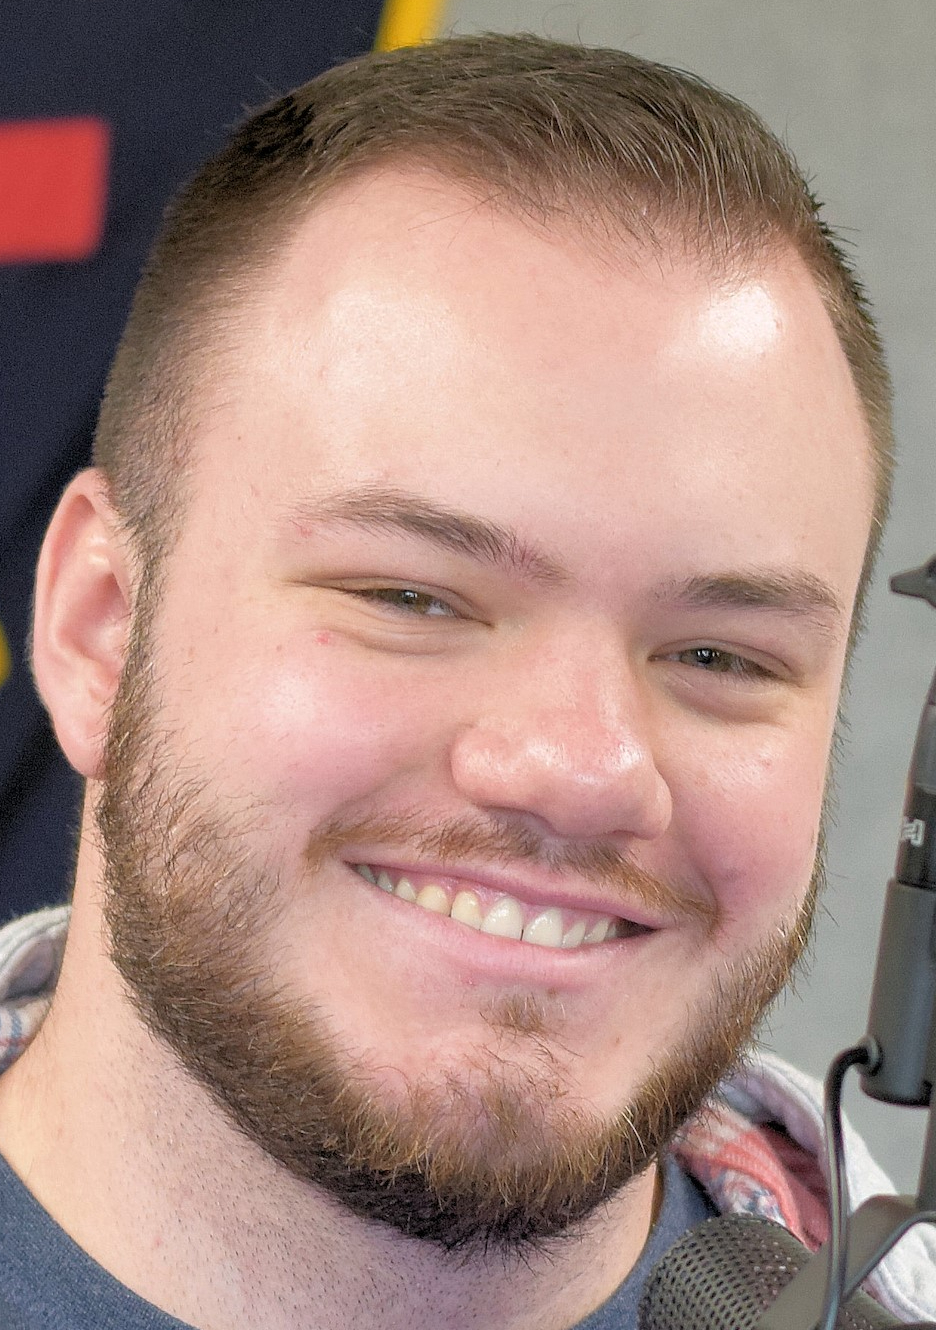  WXXC (Star 106.9)/Muncie-Marion, IN Adds Kyle Molinelli For Production Director/Middays